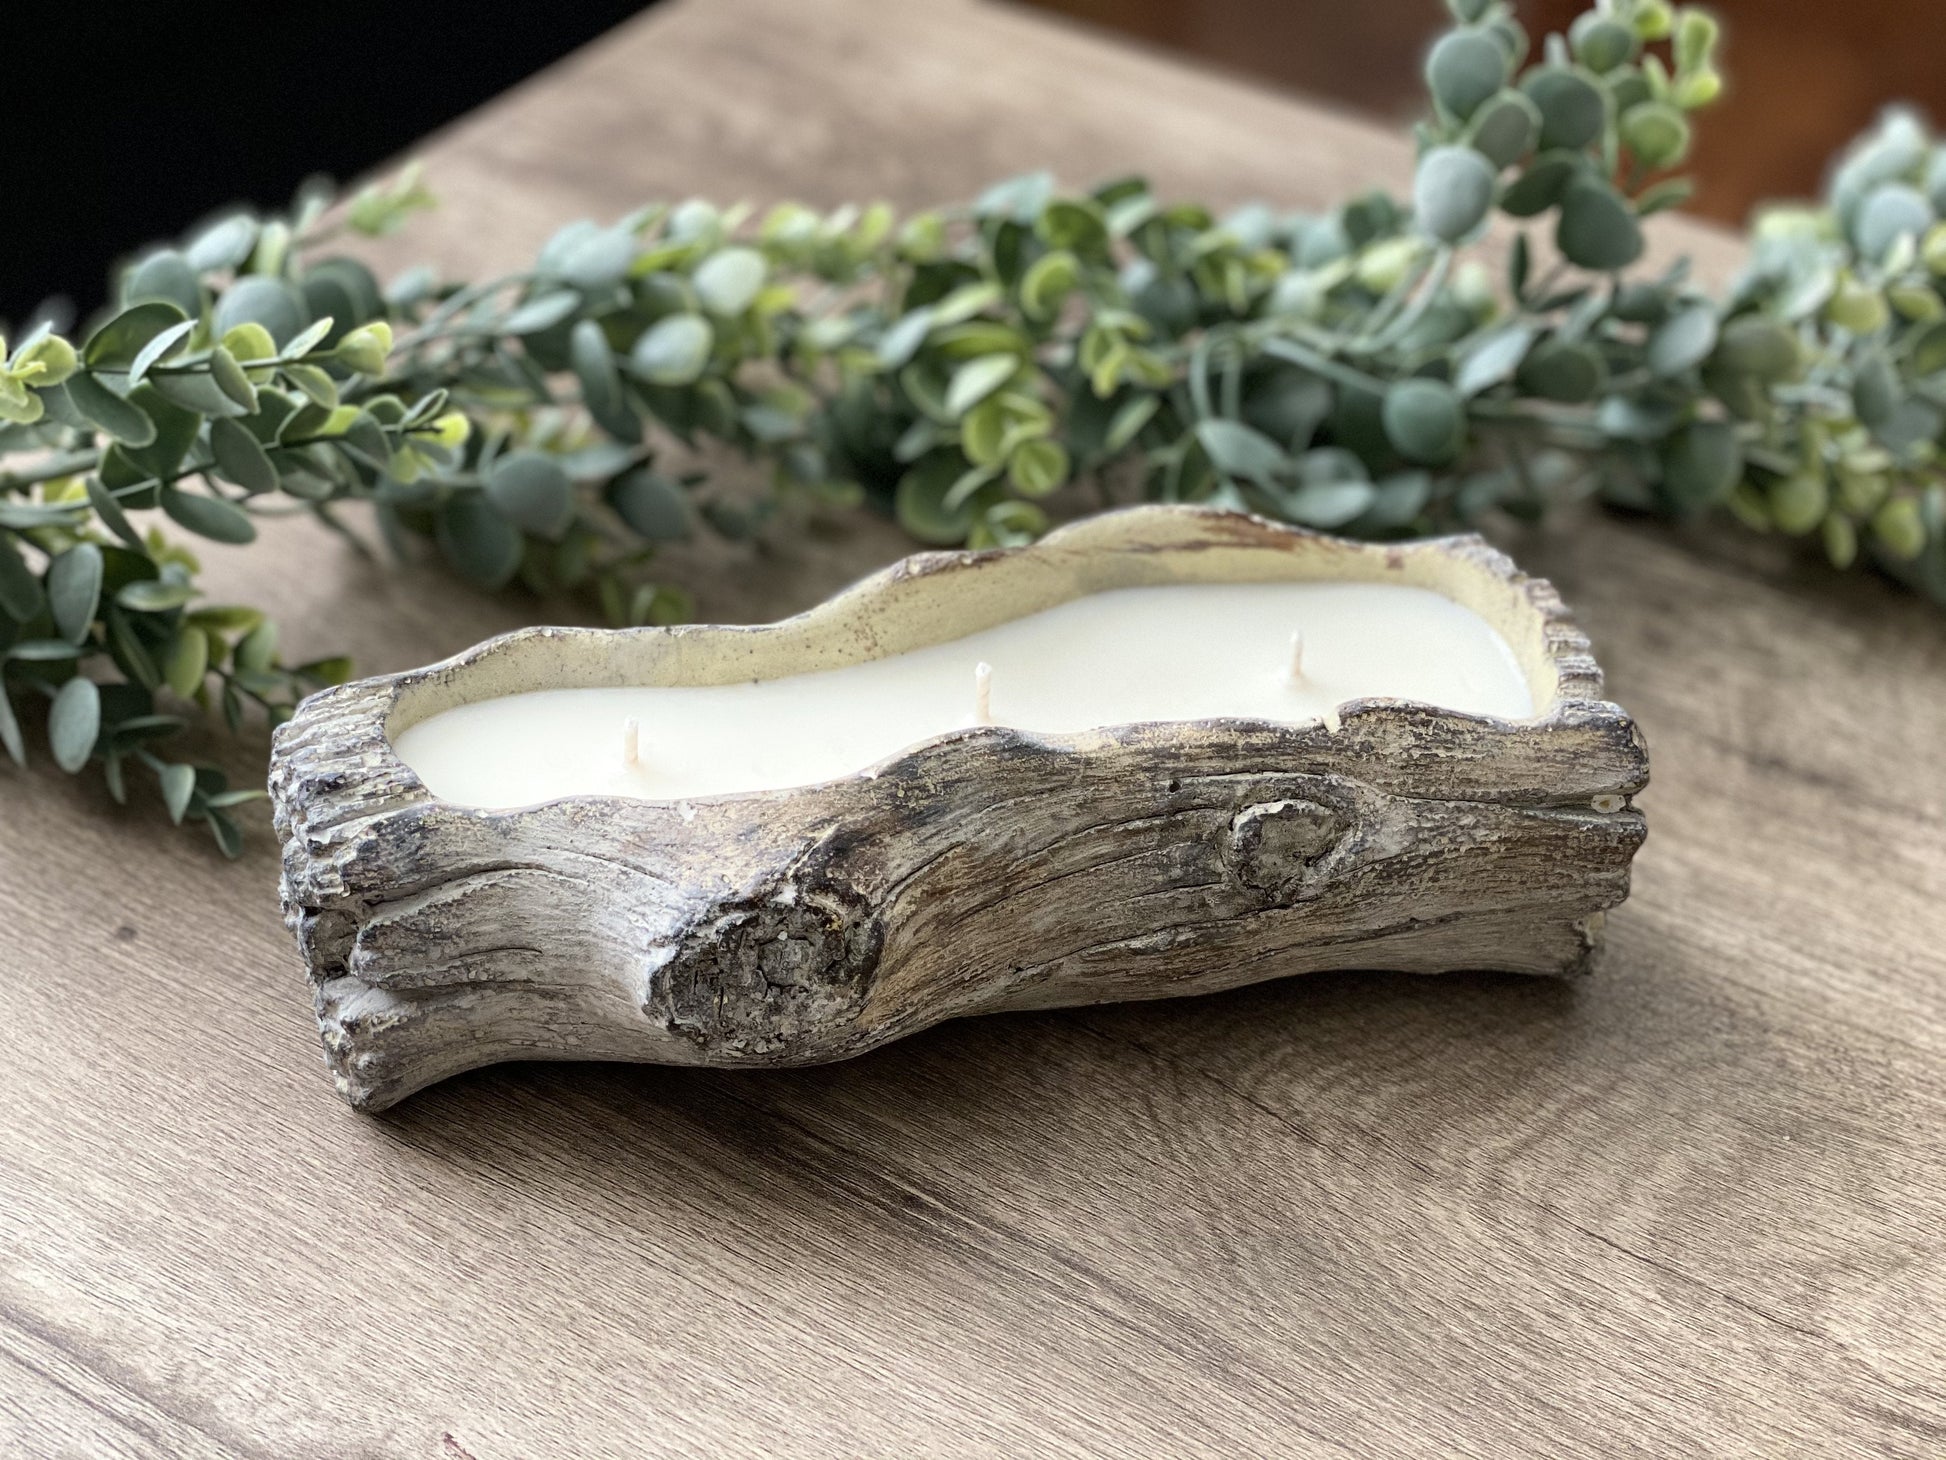 Cement Tree Log Decor Candle | Relax | 12 oz. lavender, sage, sandalwood. A unique piece of home decor that works perfectly for indoor and outdoor space. When you finished the candle, this cement log can be used as planter, serving dish and decorative holder. Bluffton Candles - The Bluffton Shop - Gift Shops